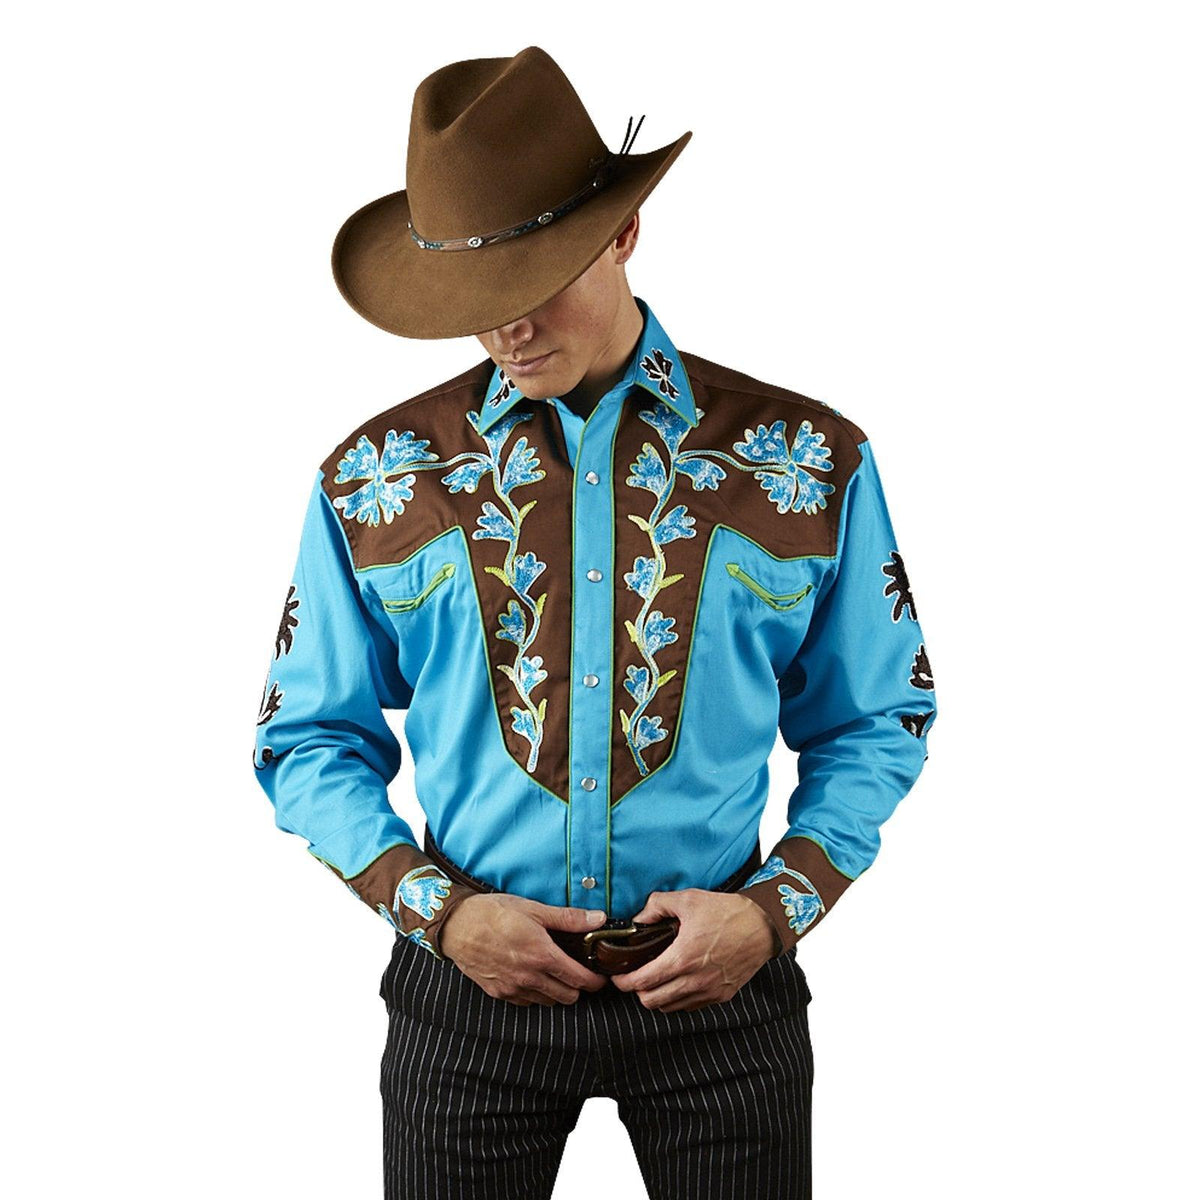 Men's Floral 2-Tone Brown & Turquoise Embroidered Western Shirt - Flyclothing LLC